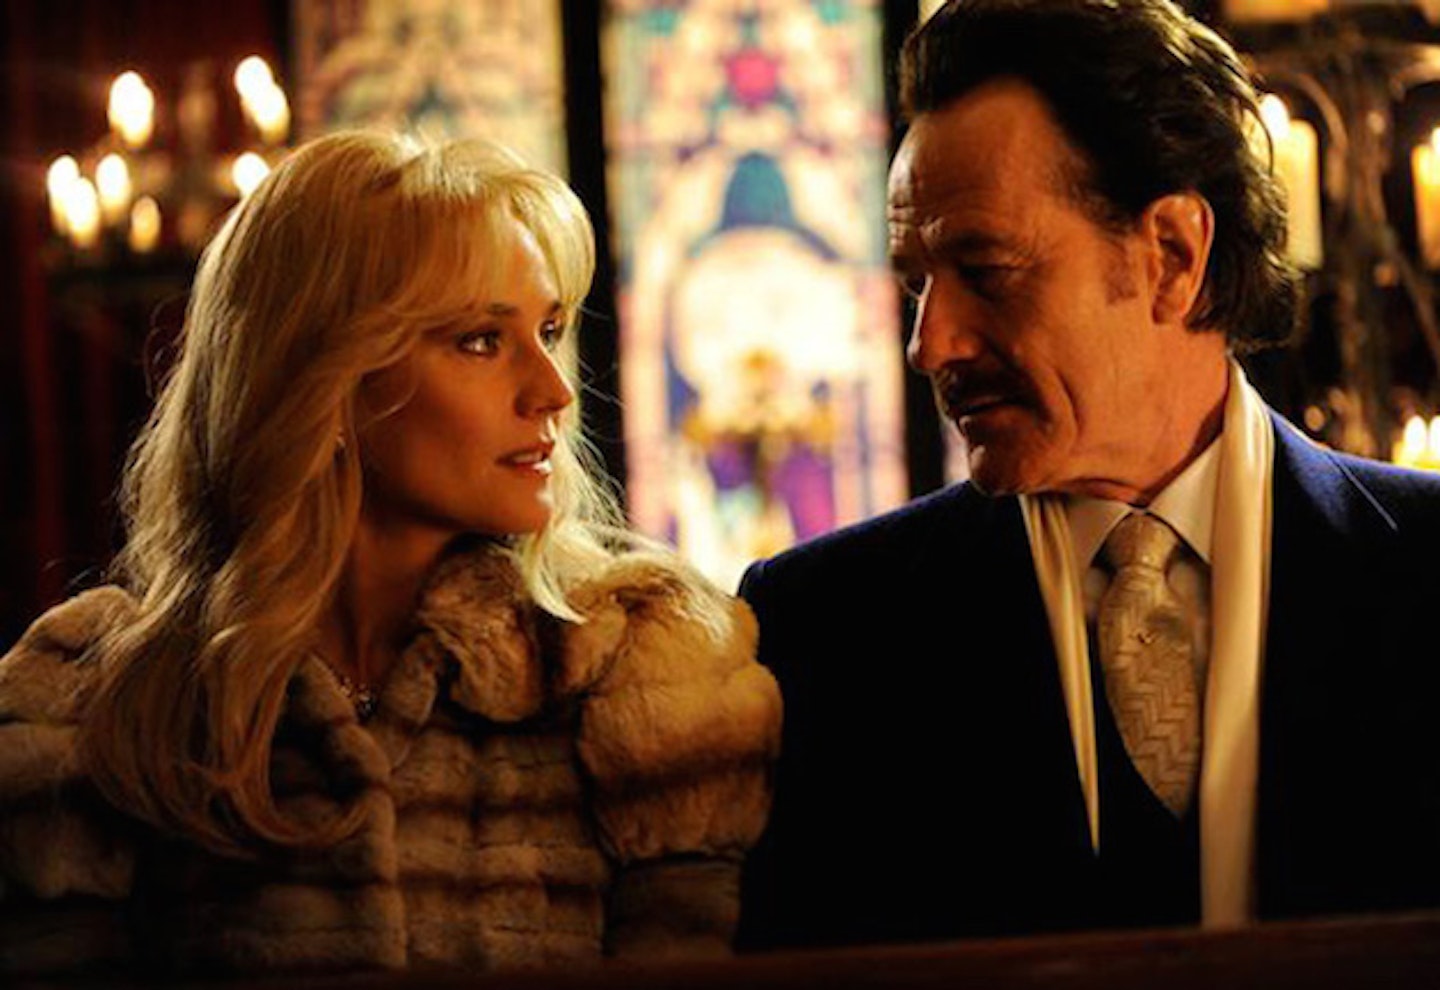 First Look At Bryan Cranston & Diane Kruger In The Infiltrator